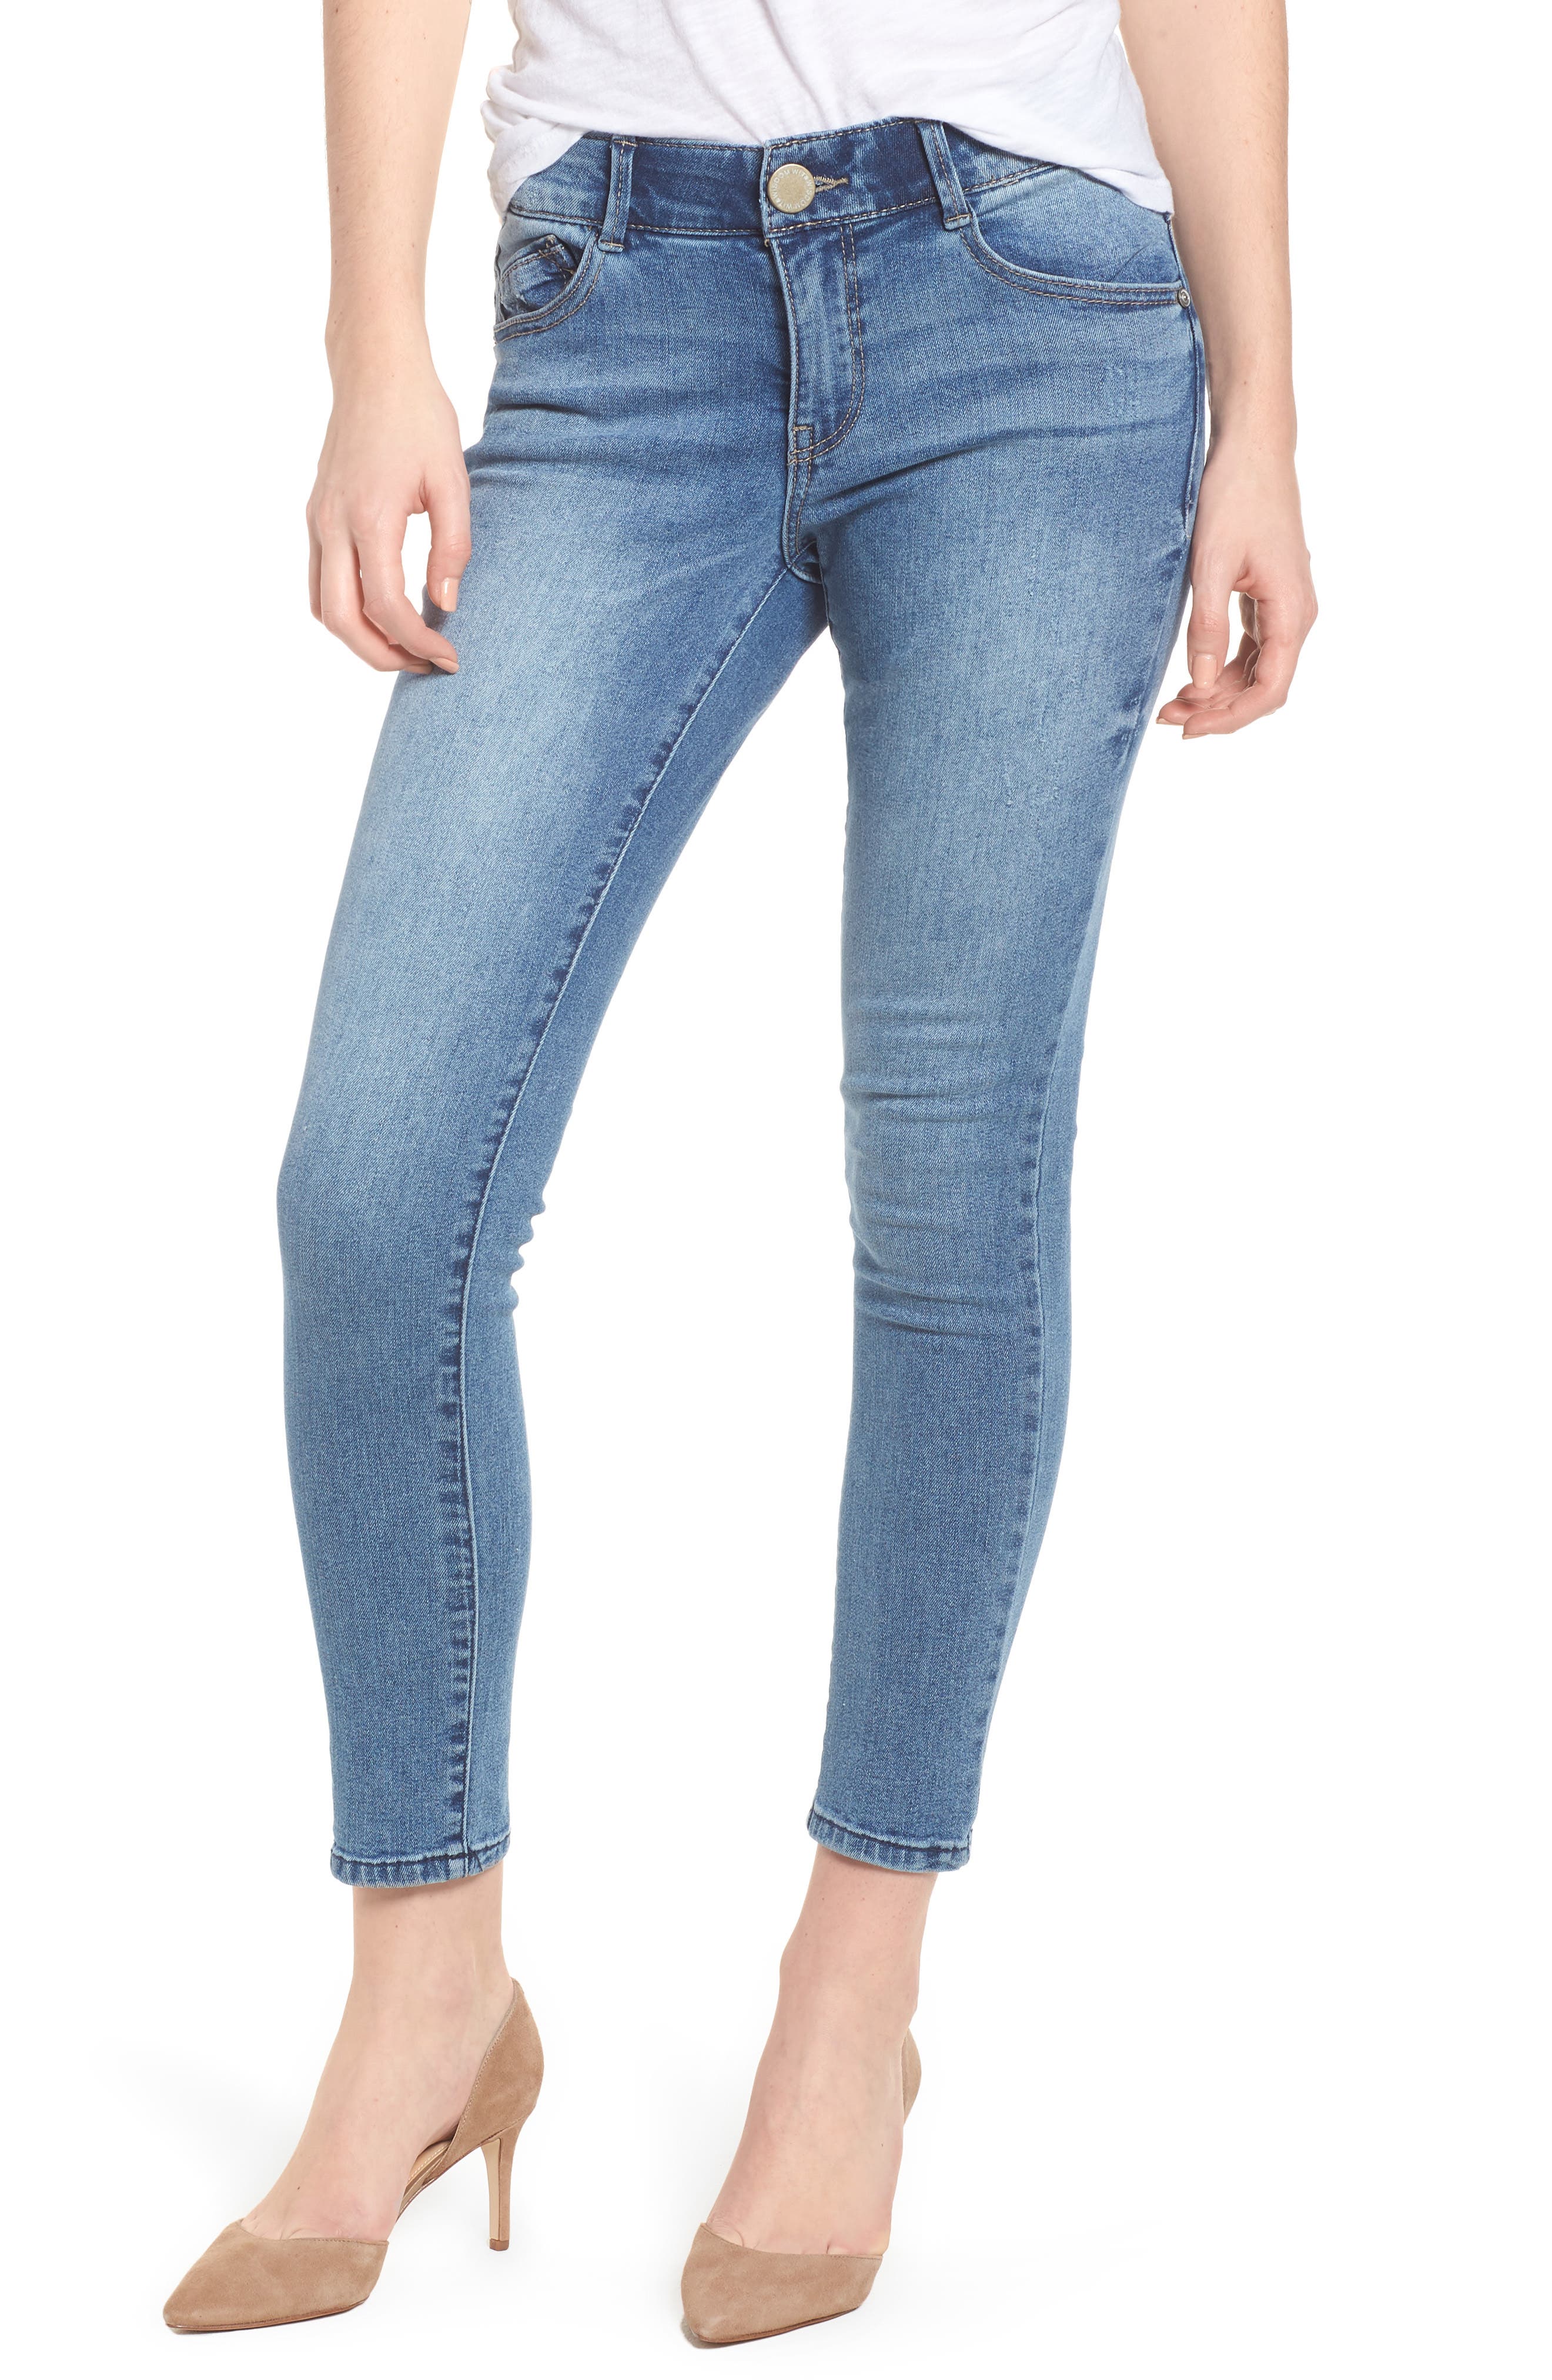 wit and wisdom ankle skimmer jeans